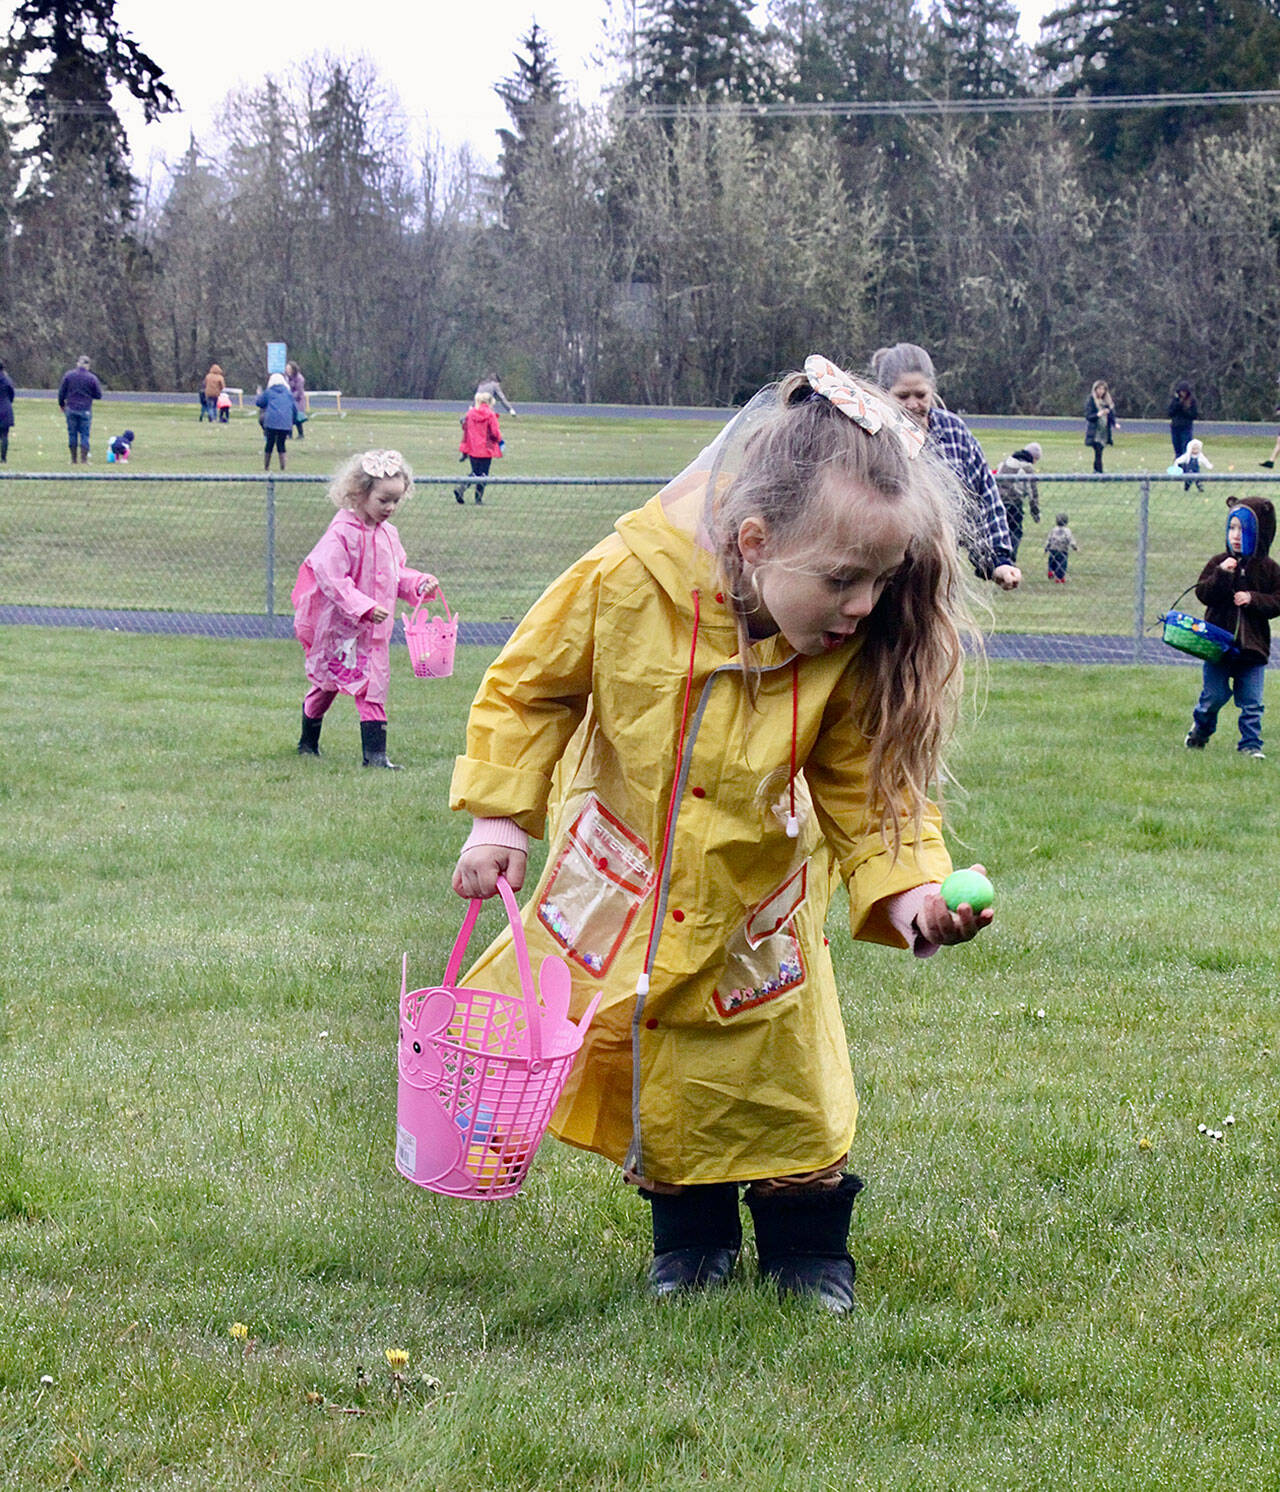 Rose Cowden, 6, of Joyce gets a green egg Saturday during the 19th Kitchen Family Easter Egg Hunt held on the playground of Crescent School. The event drew a crowd estimated at nearly 300 kids, parents and grandparents with 2,200 plastic and real eggs for children in three age brackets. (Dave Logan/For Peninsula Daily News)